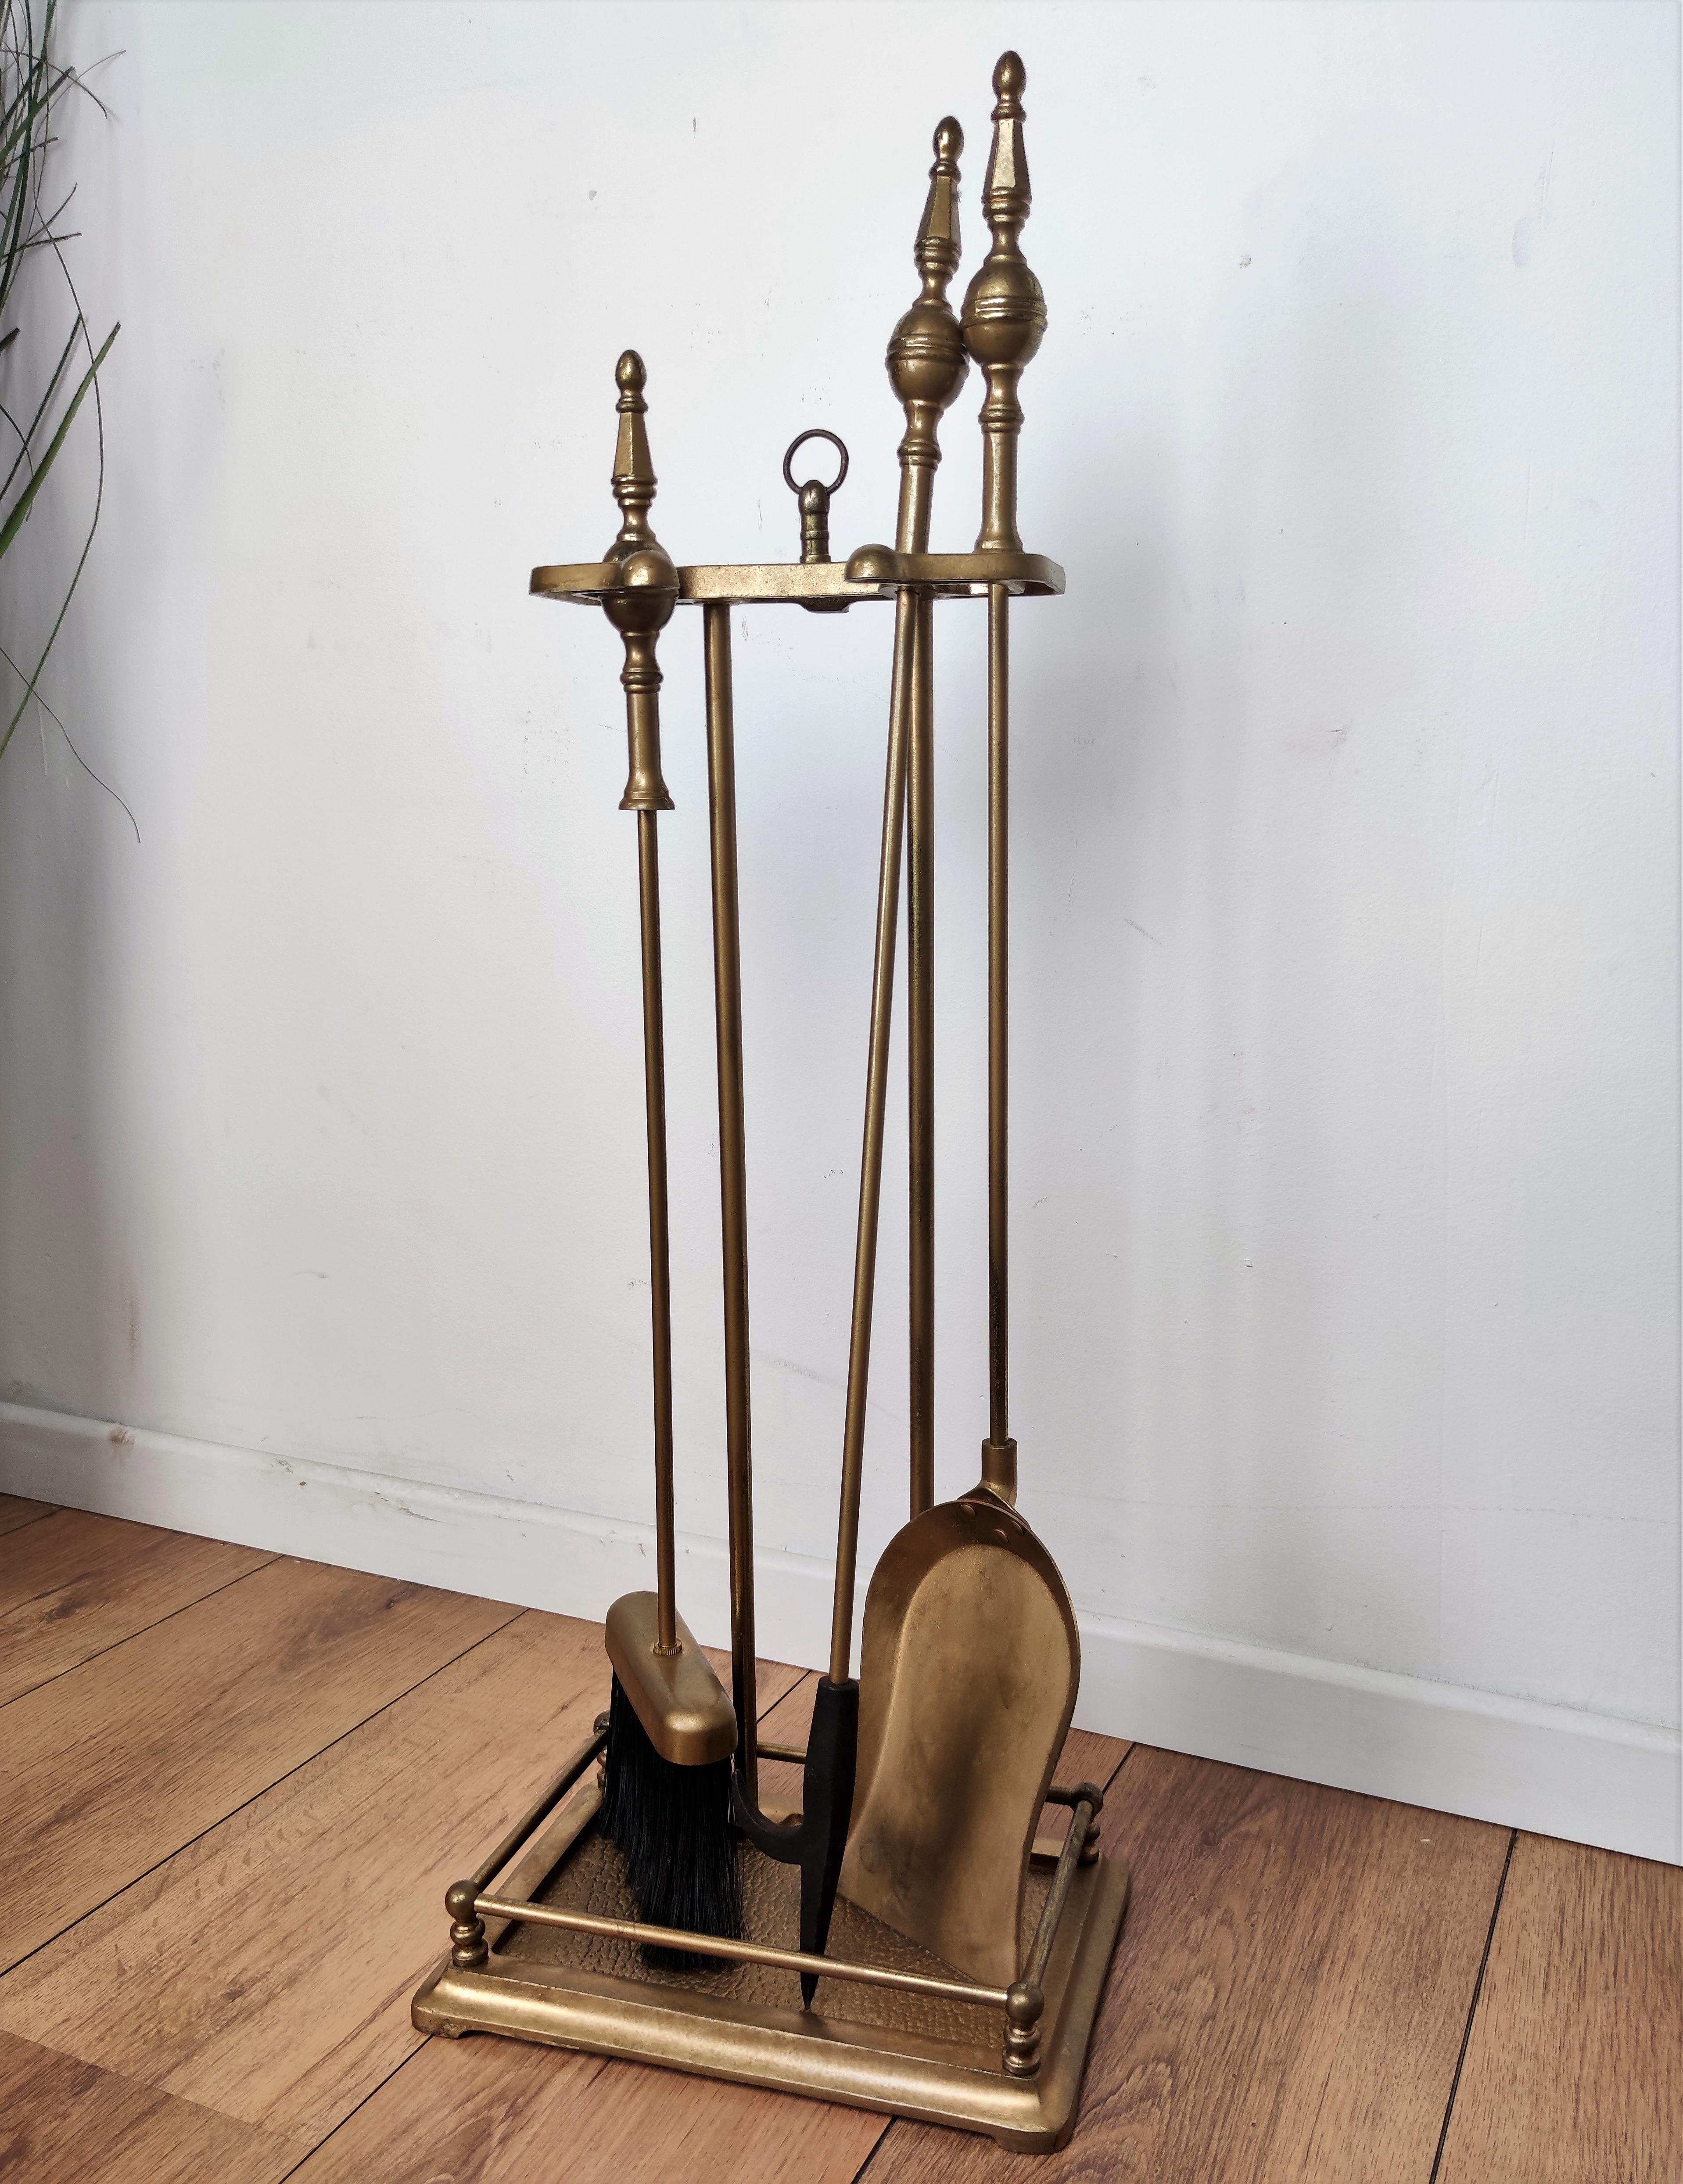 Italian brass three-piece fire tool set with stand. The set consists of a poker, a shovel and a pair of tongs, each with an ornate acorn handle such as the stand.